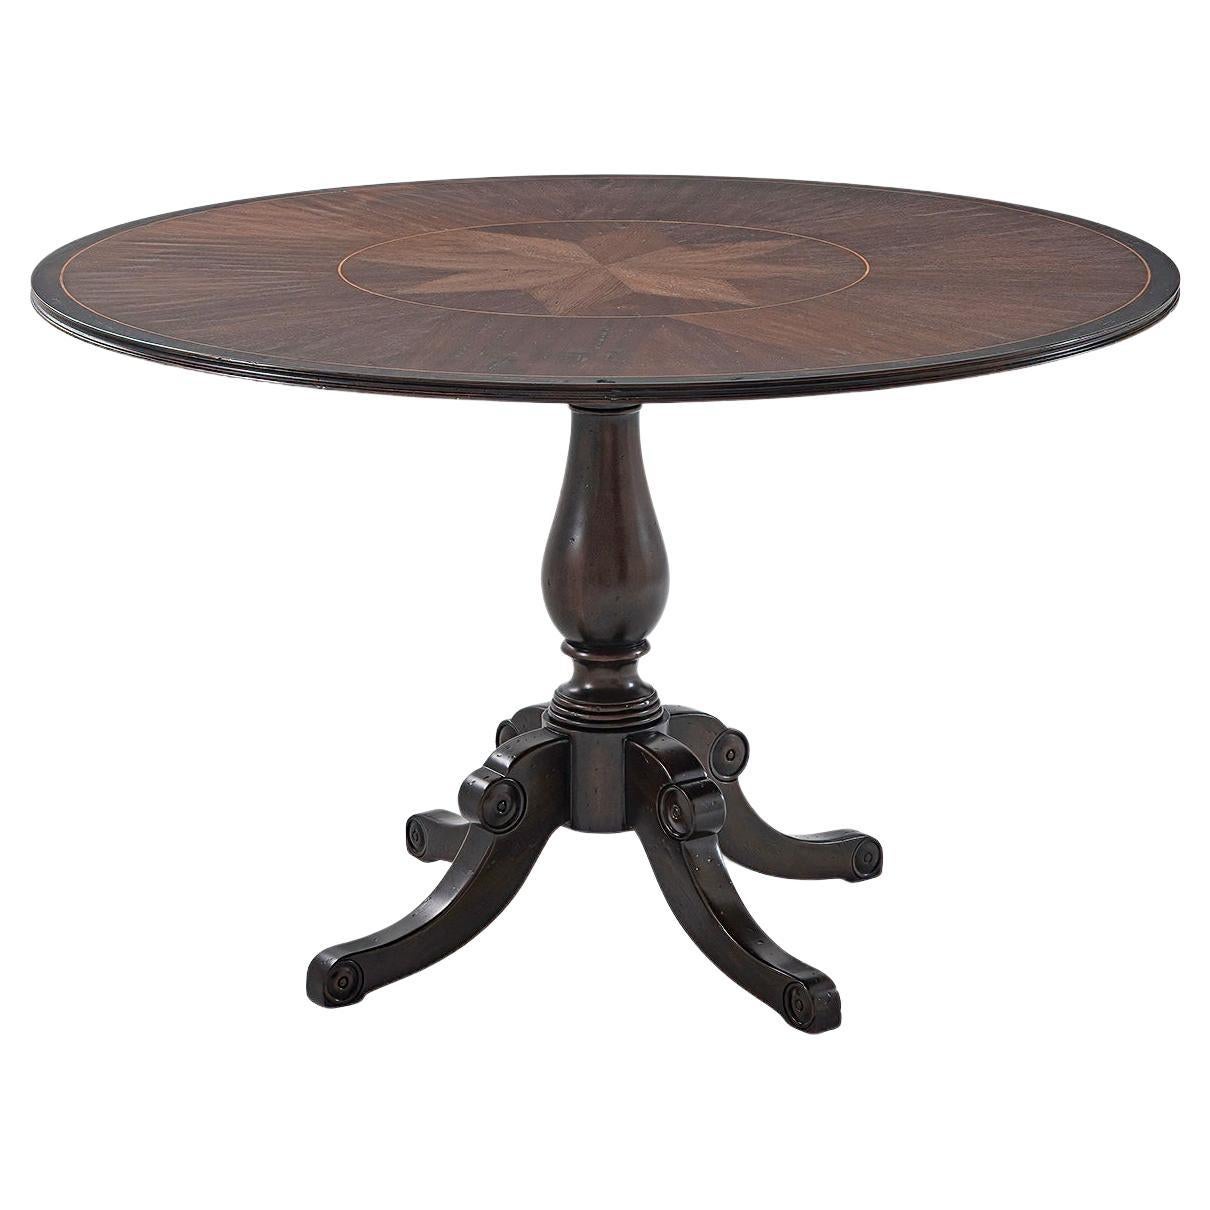 Italian Provincial Dining Table For Sale